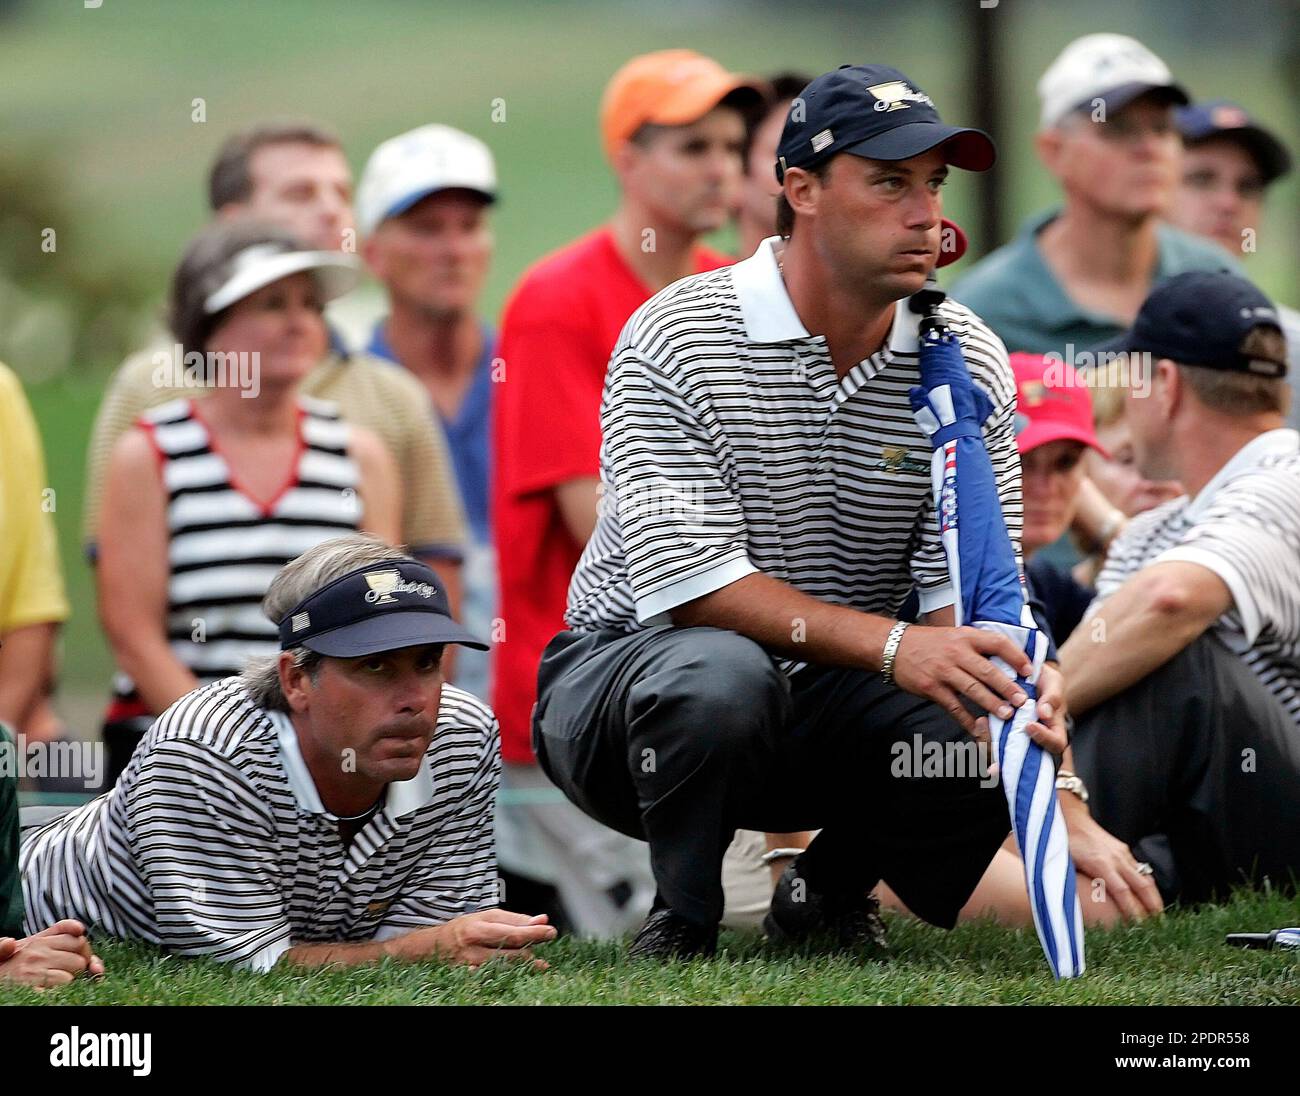 Fred Couples, left, and Chris DiMarco of the United states watch the action on the 18th green during the better-ball matches at the Presidents Cup Friday, Sept